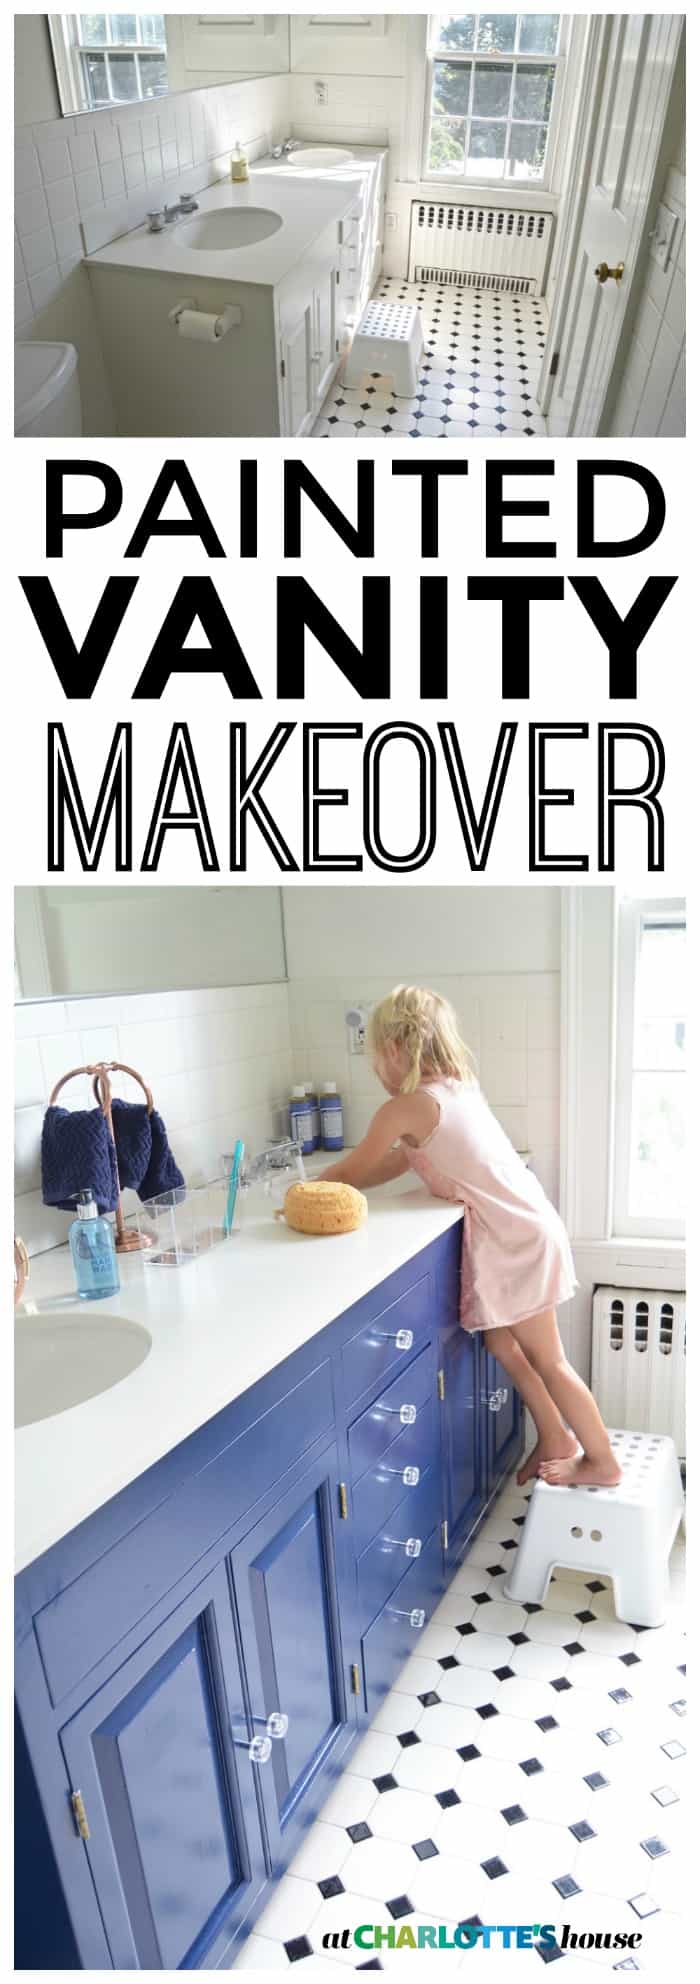 Complete vanity makeover for under $20 using this amazing paint!